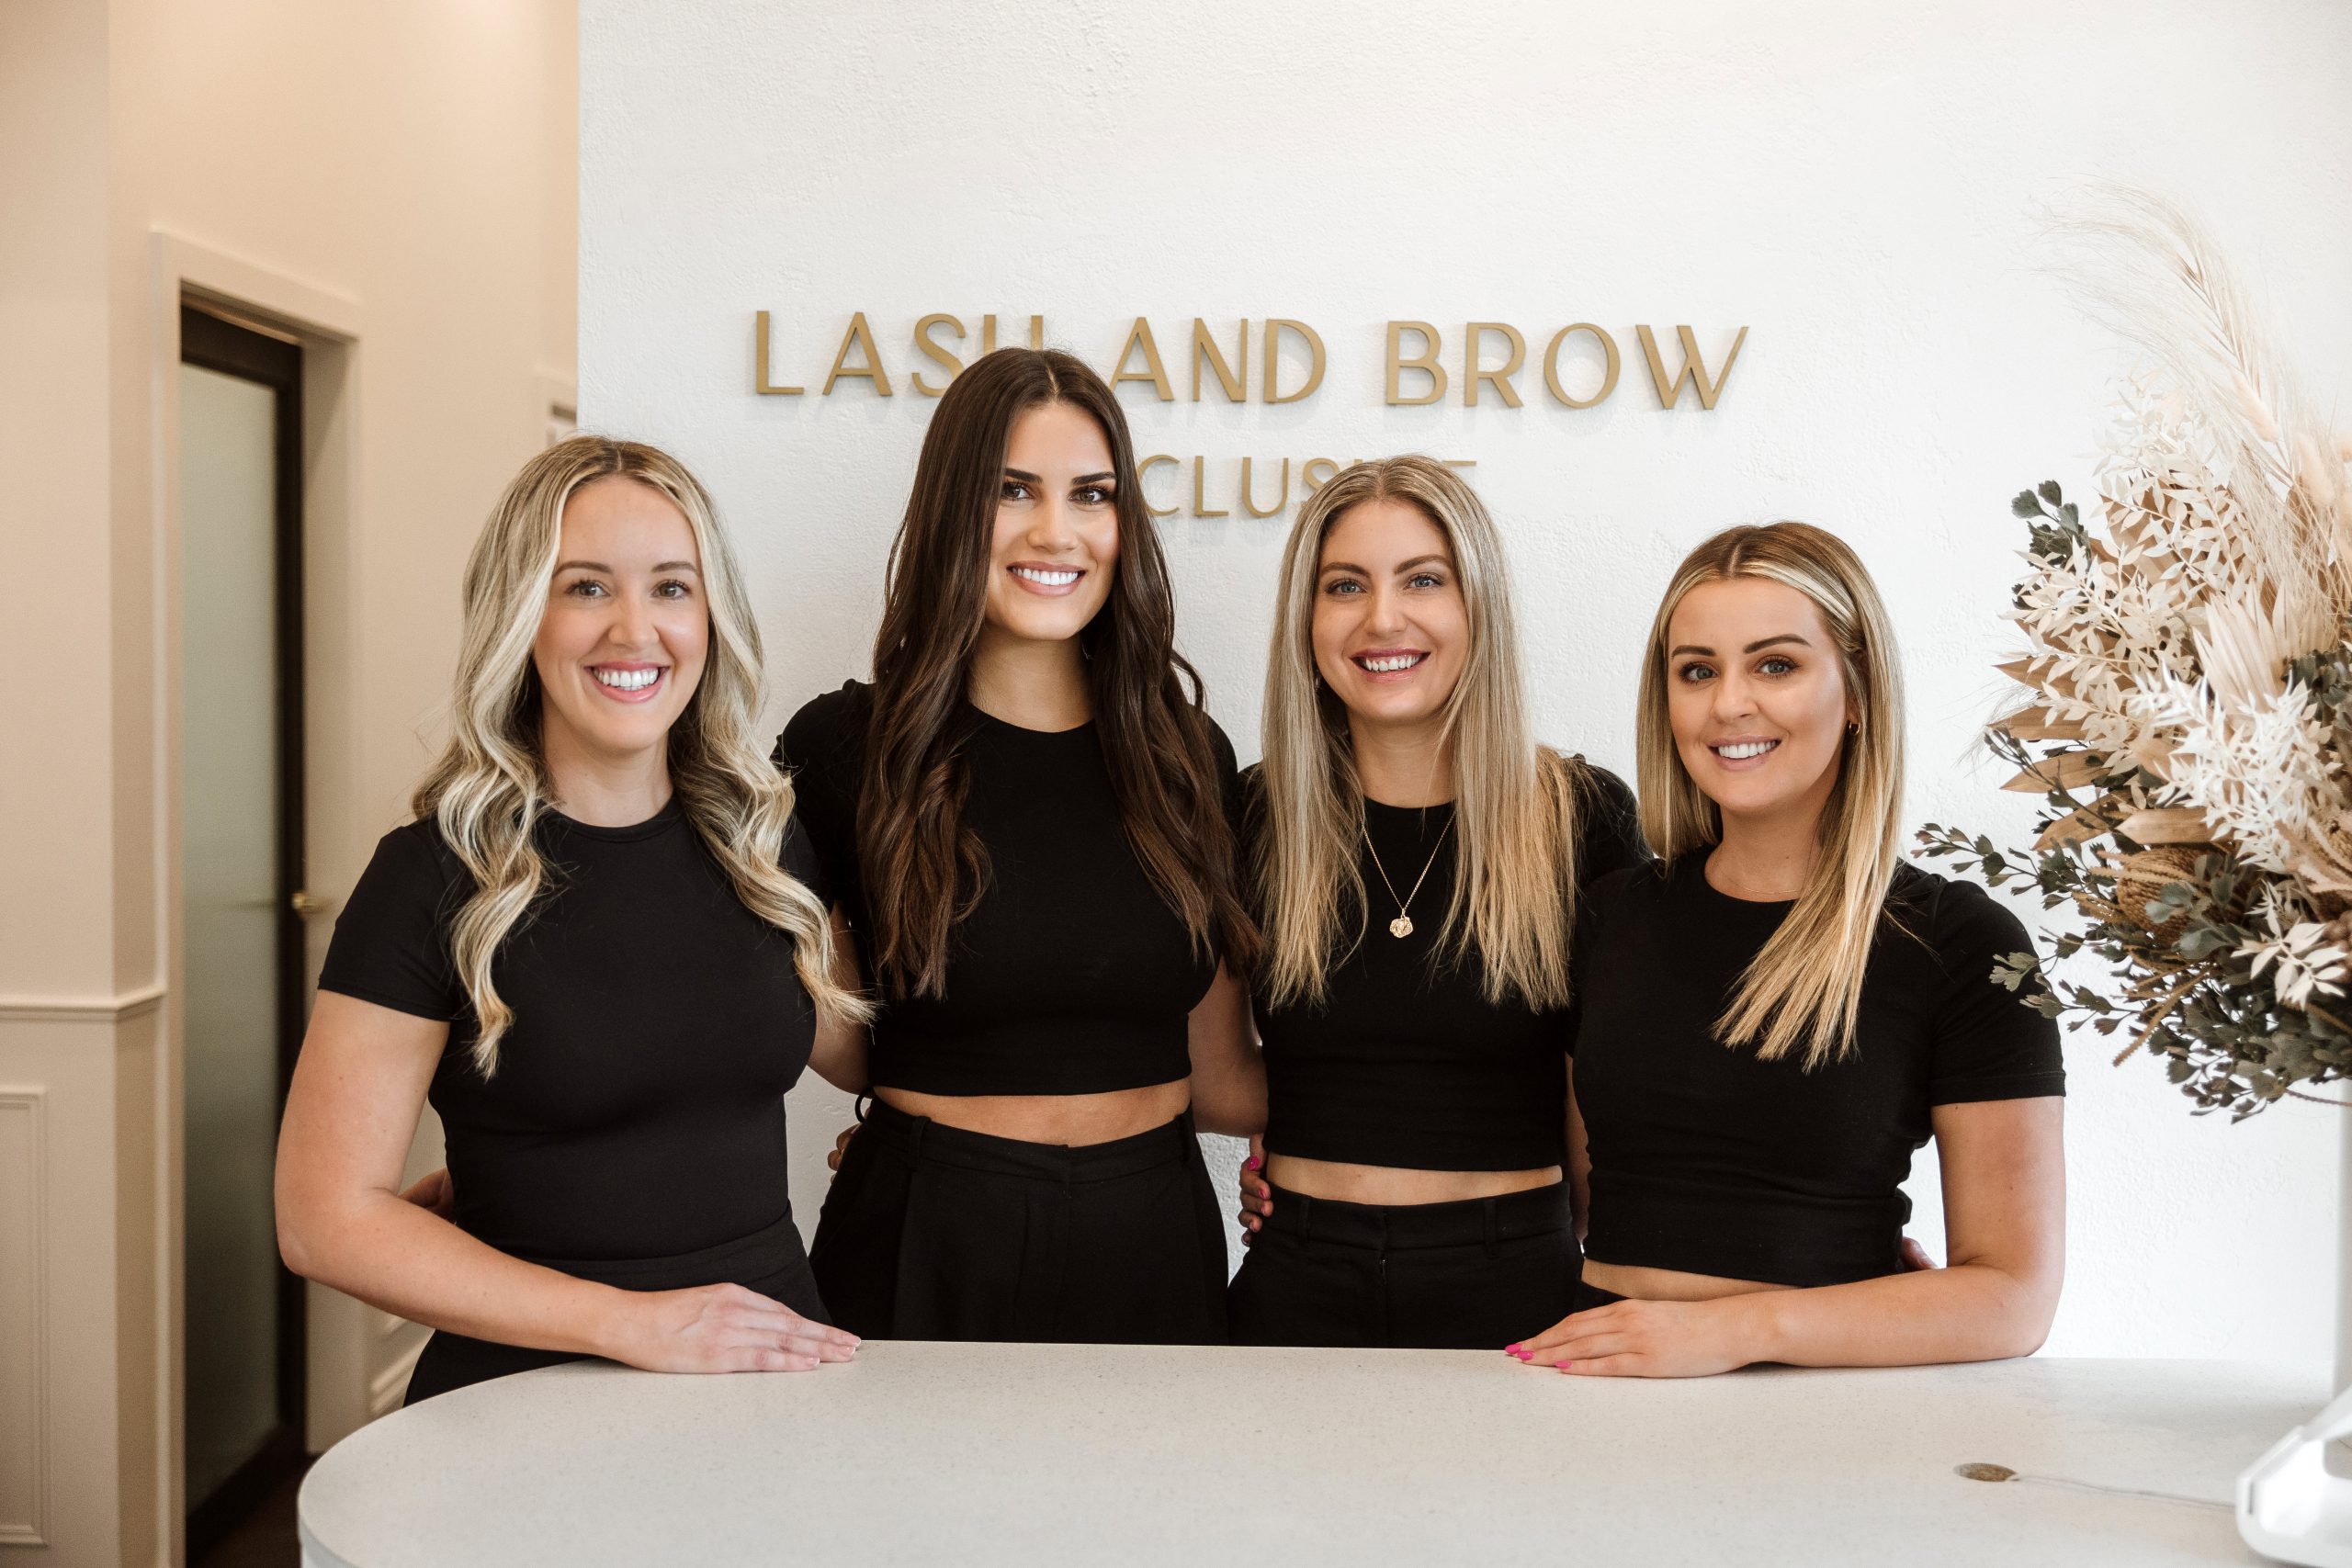 Lash & Brow Exclusive is a luxurious and eco-conscious studio based in Burleigh Heads